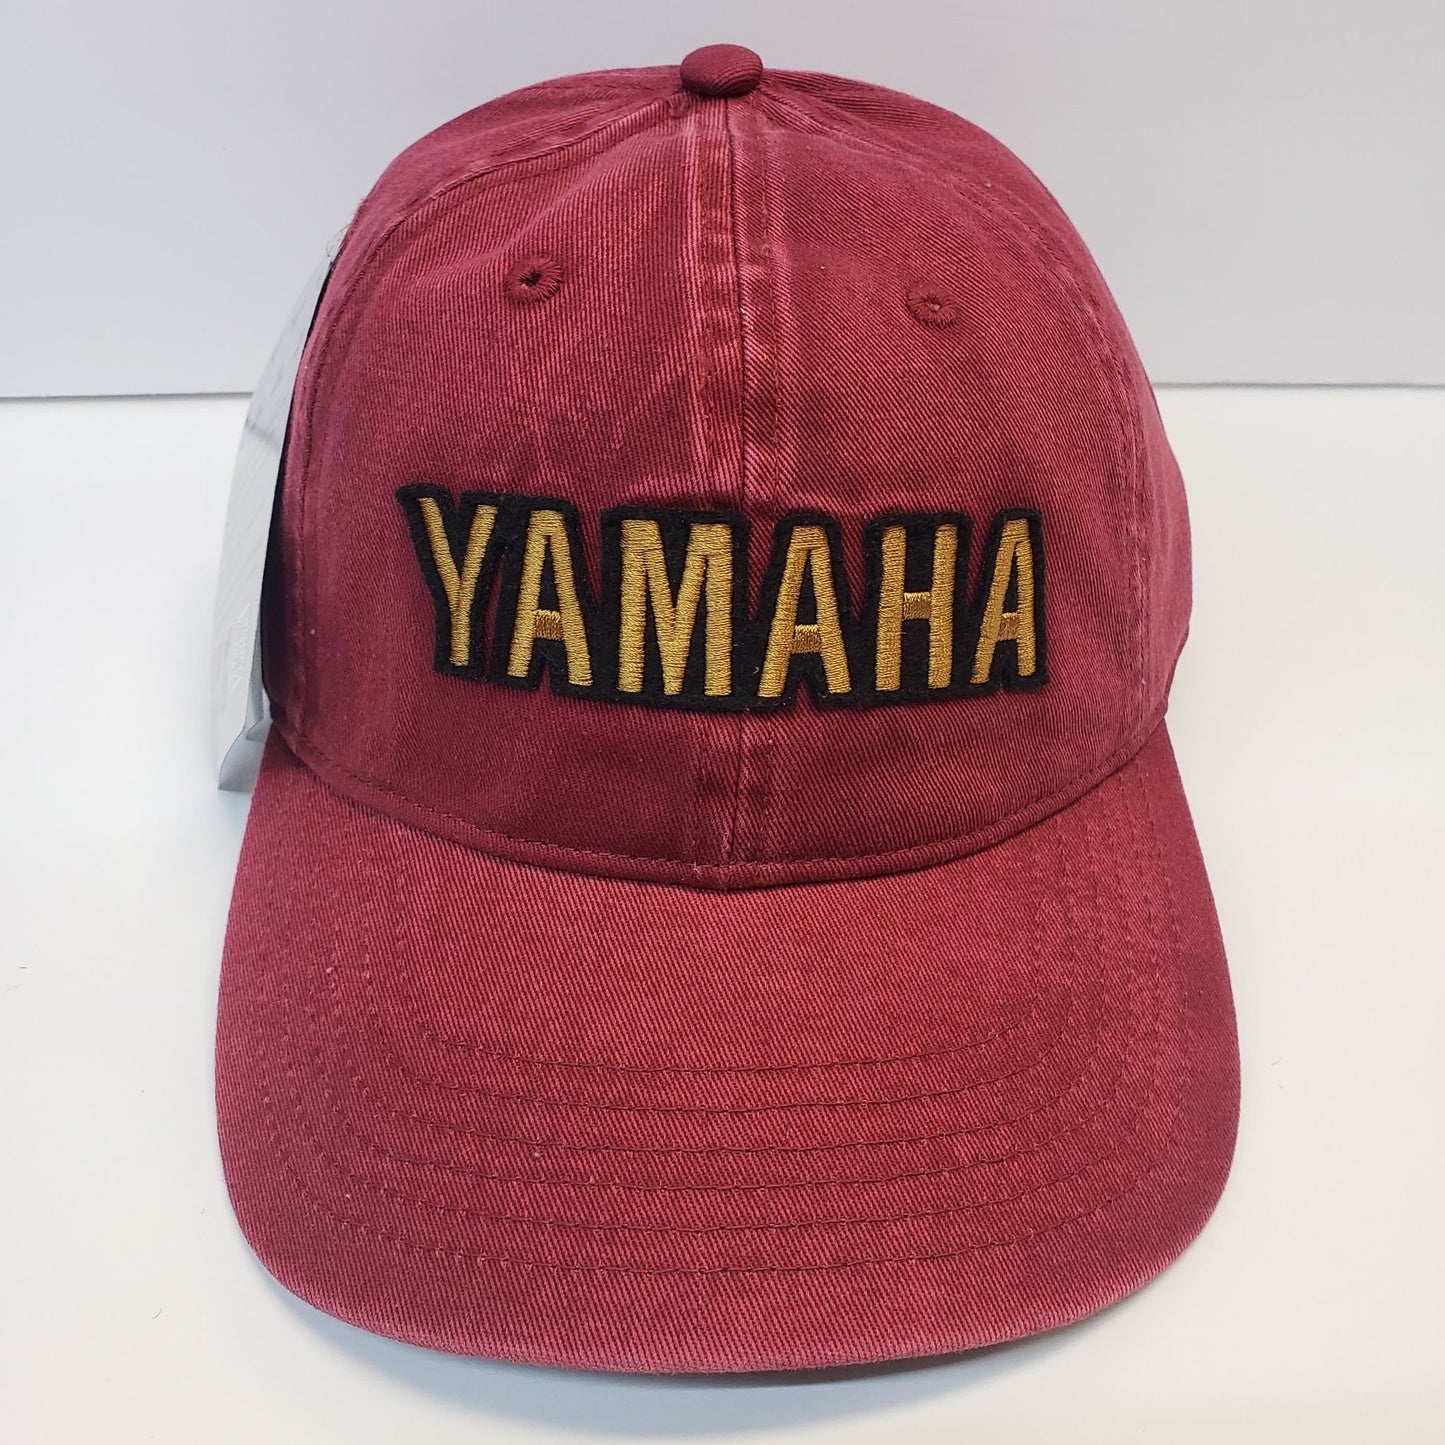 New Authentic Yamaha Hat-Heritage Curved Bill-Red Cloth